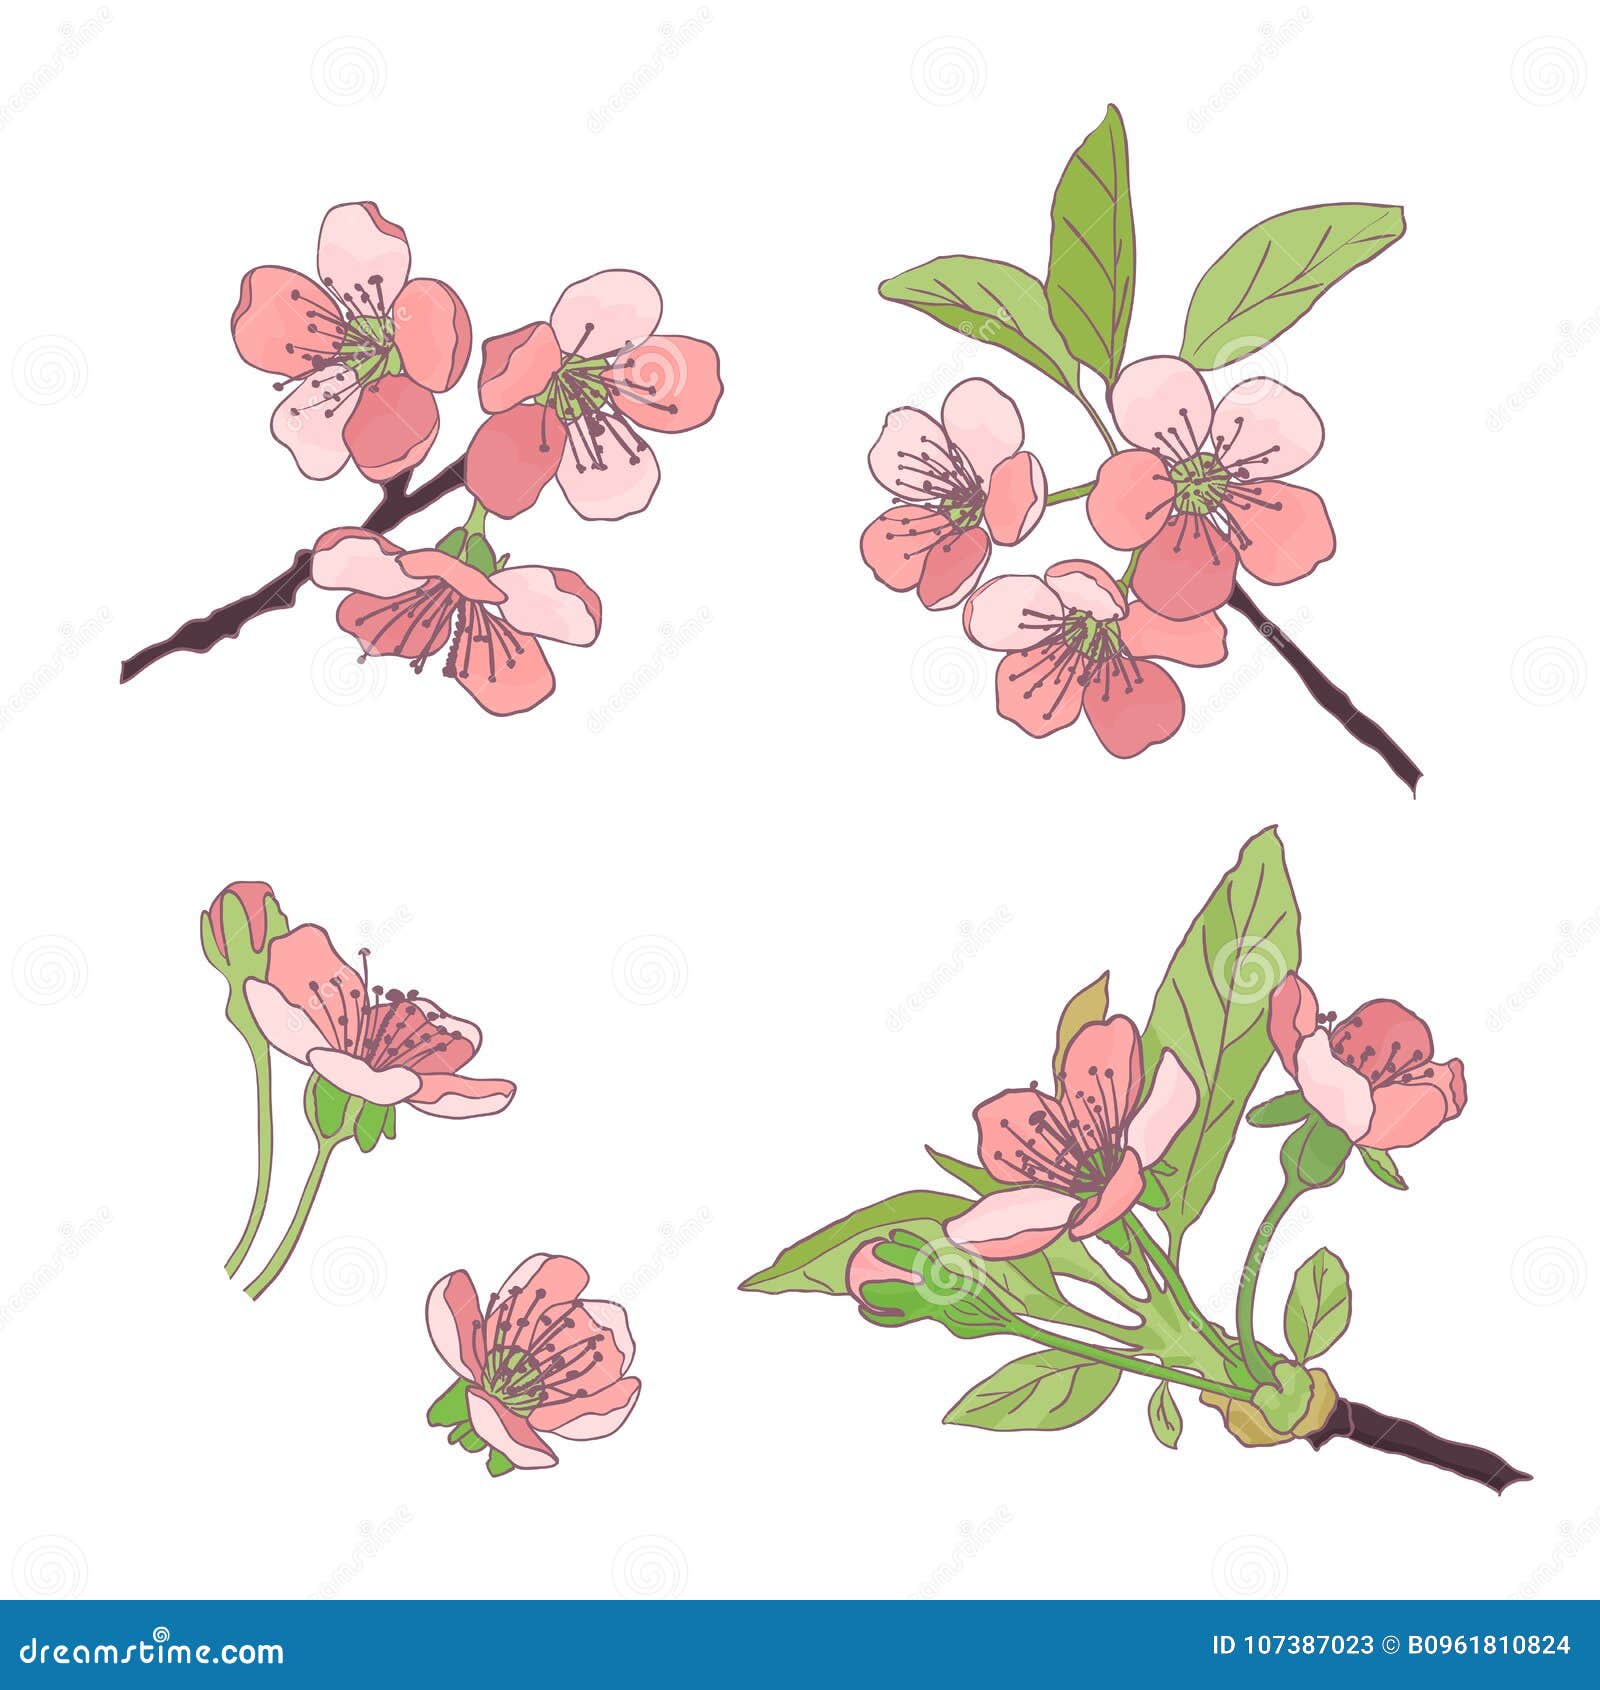 How to Draw Cherry Blossom Sakura  Step by Step for Beginners  YouTube